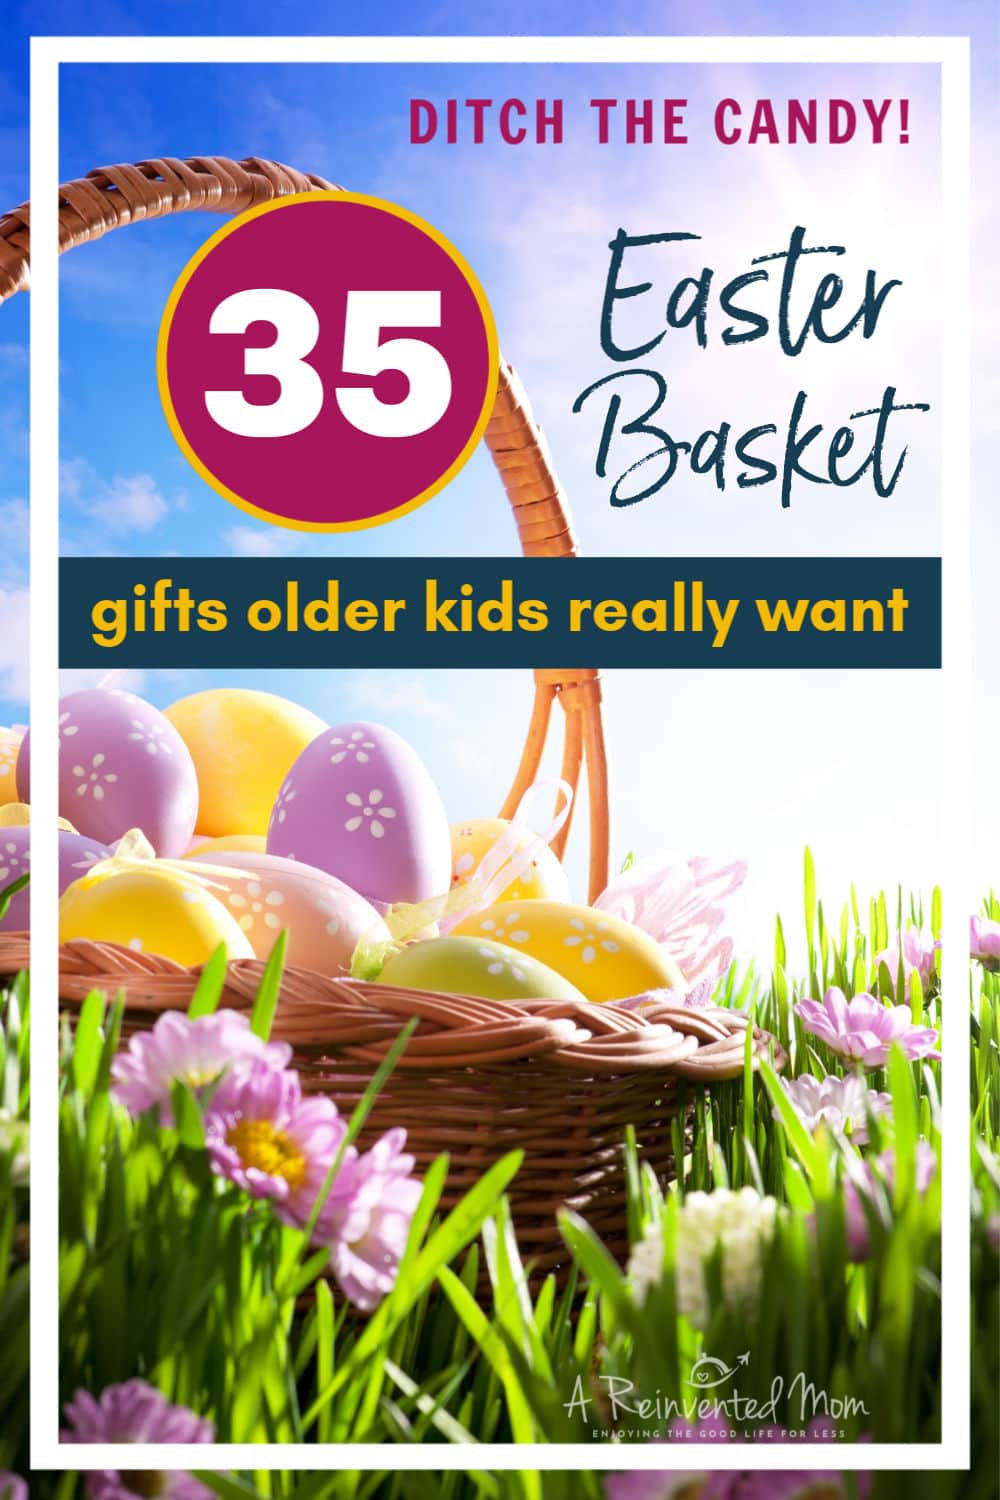 Easter basket filled with colored eggs  in grass with Easter basket ideas for teens text overlay.